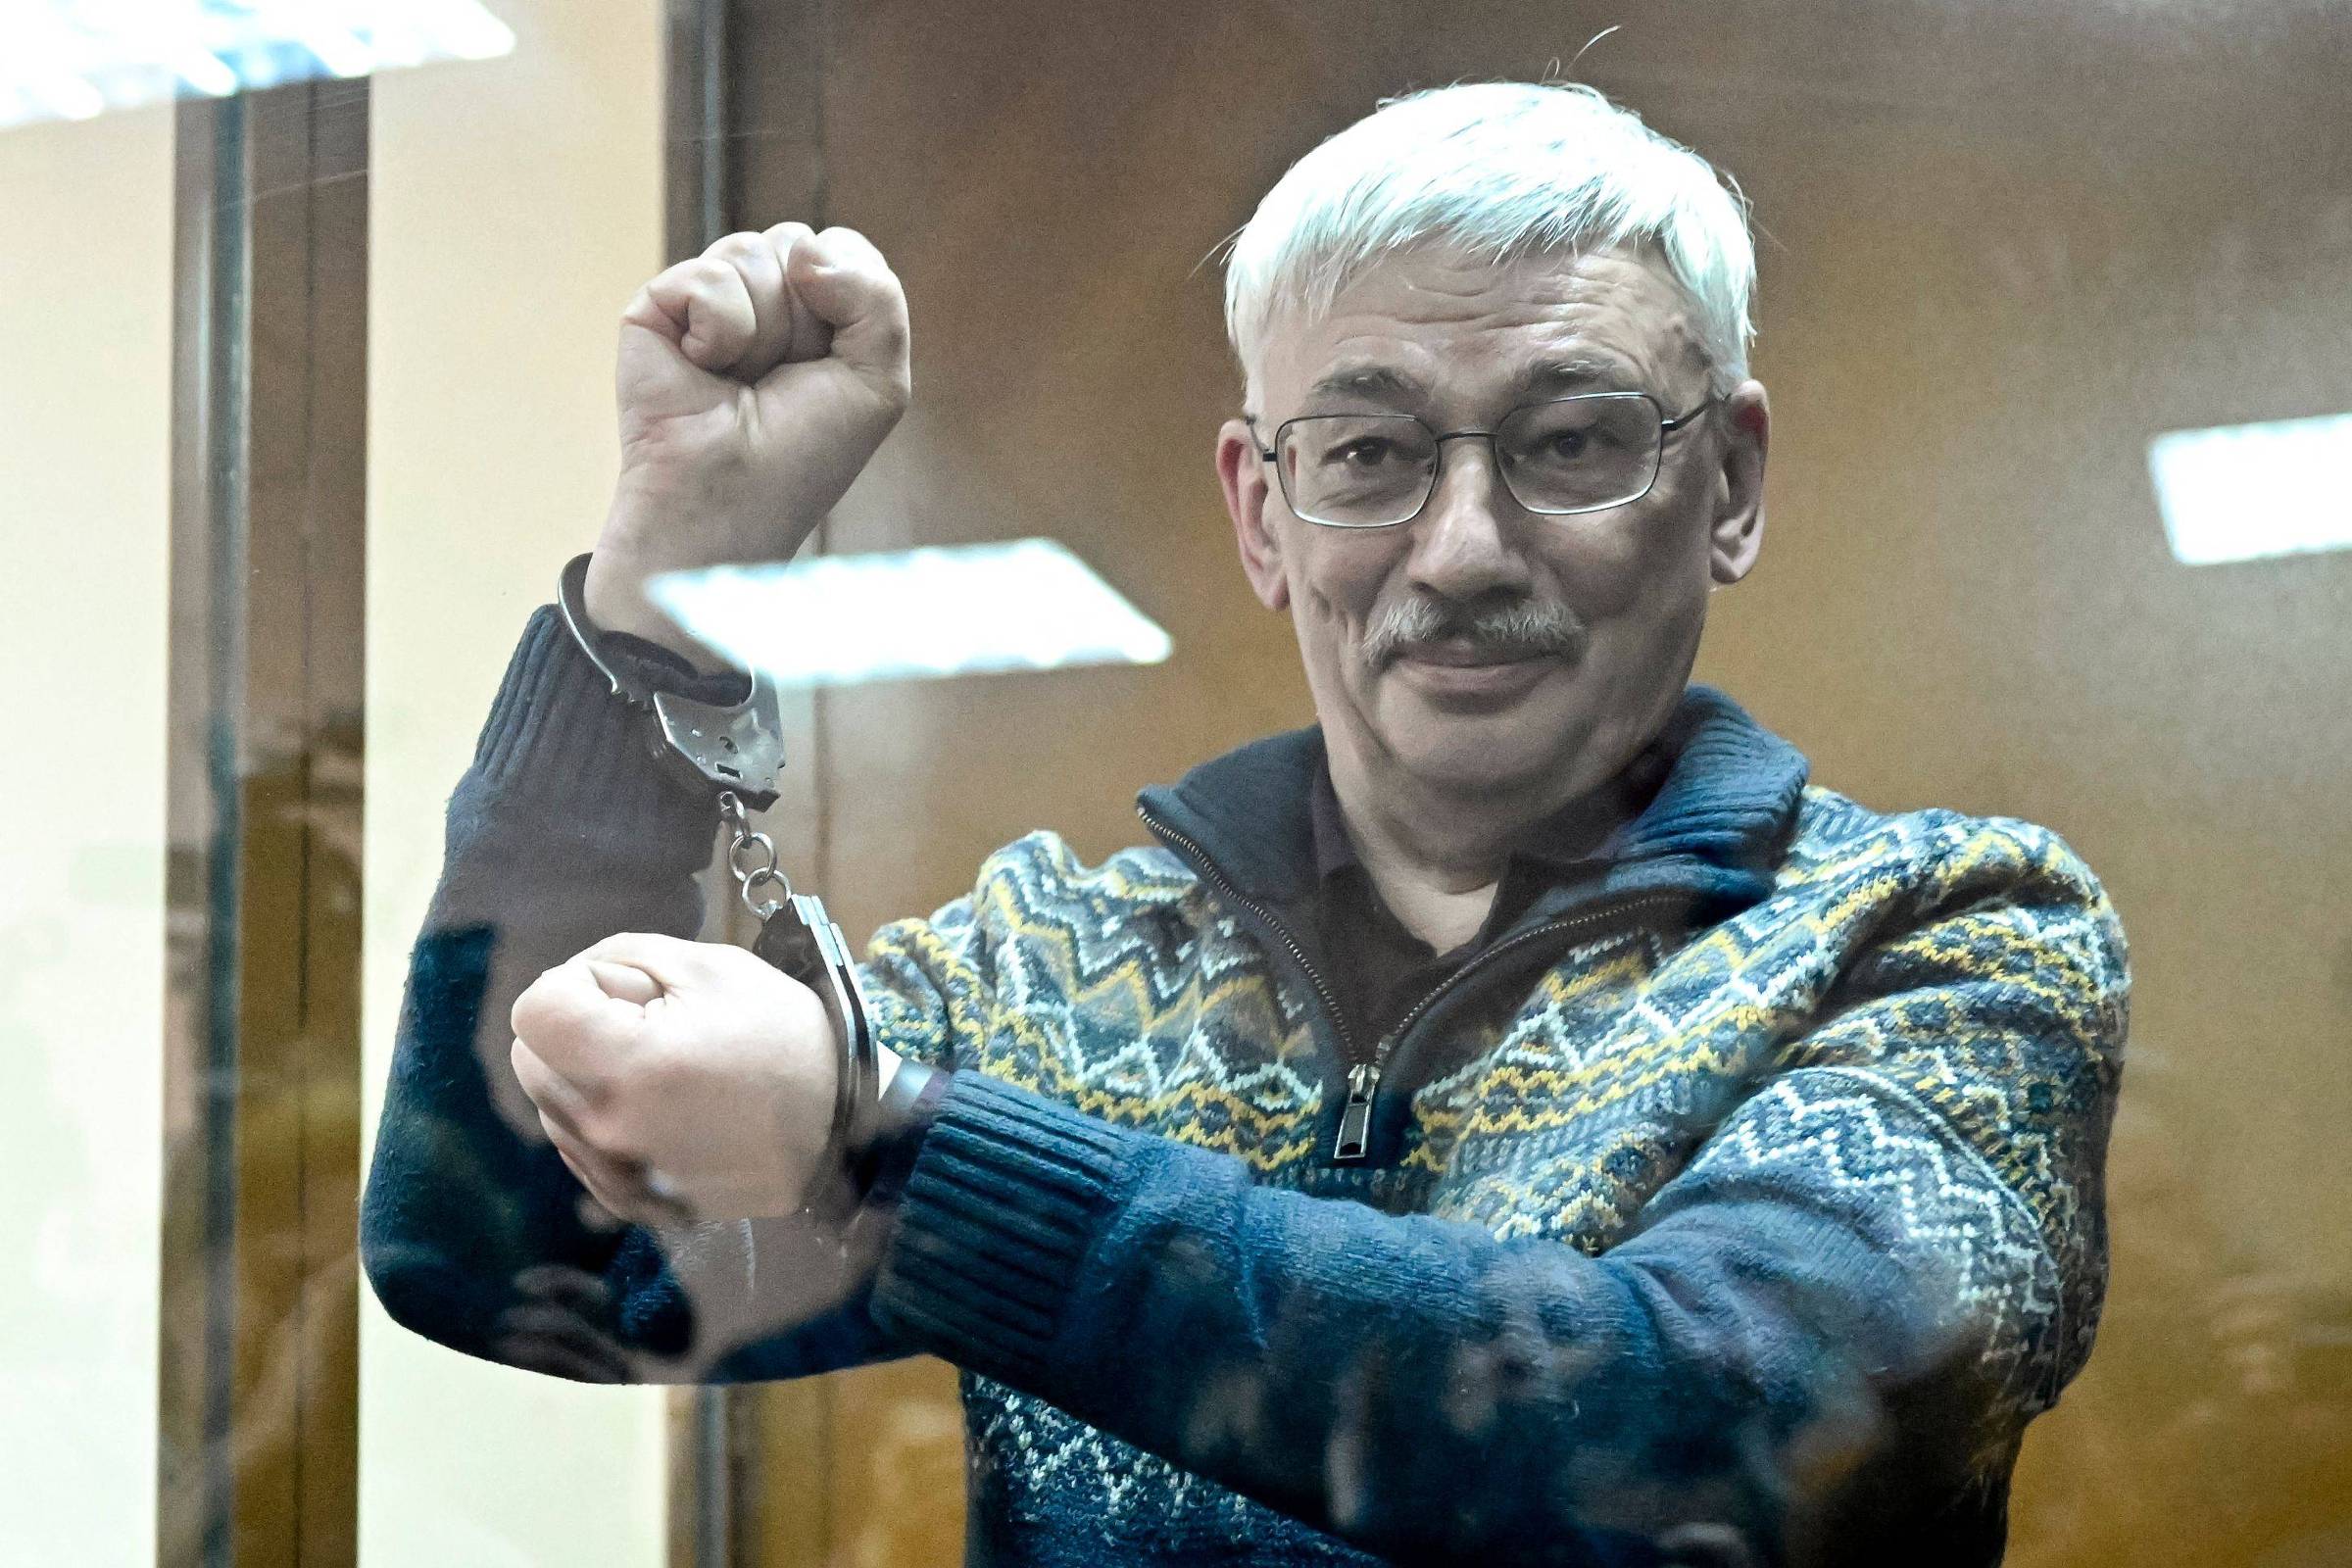 Russia sentences activist from Nobel Peace Prize-winning group to prison